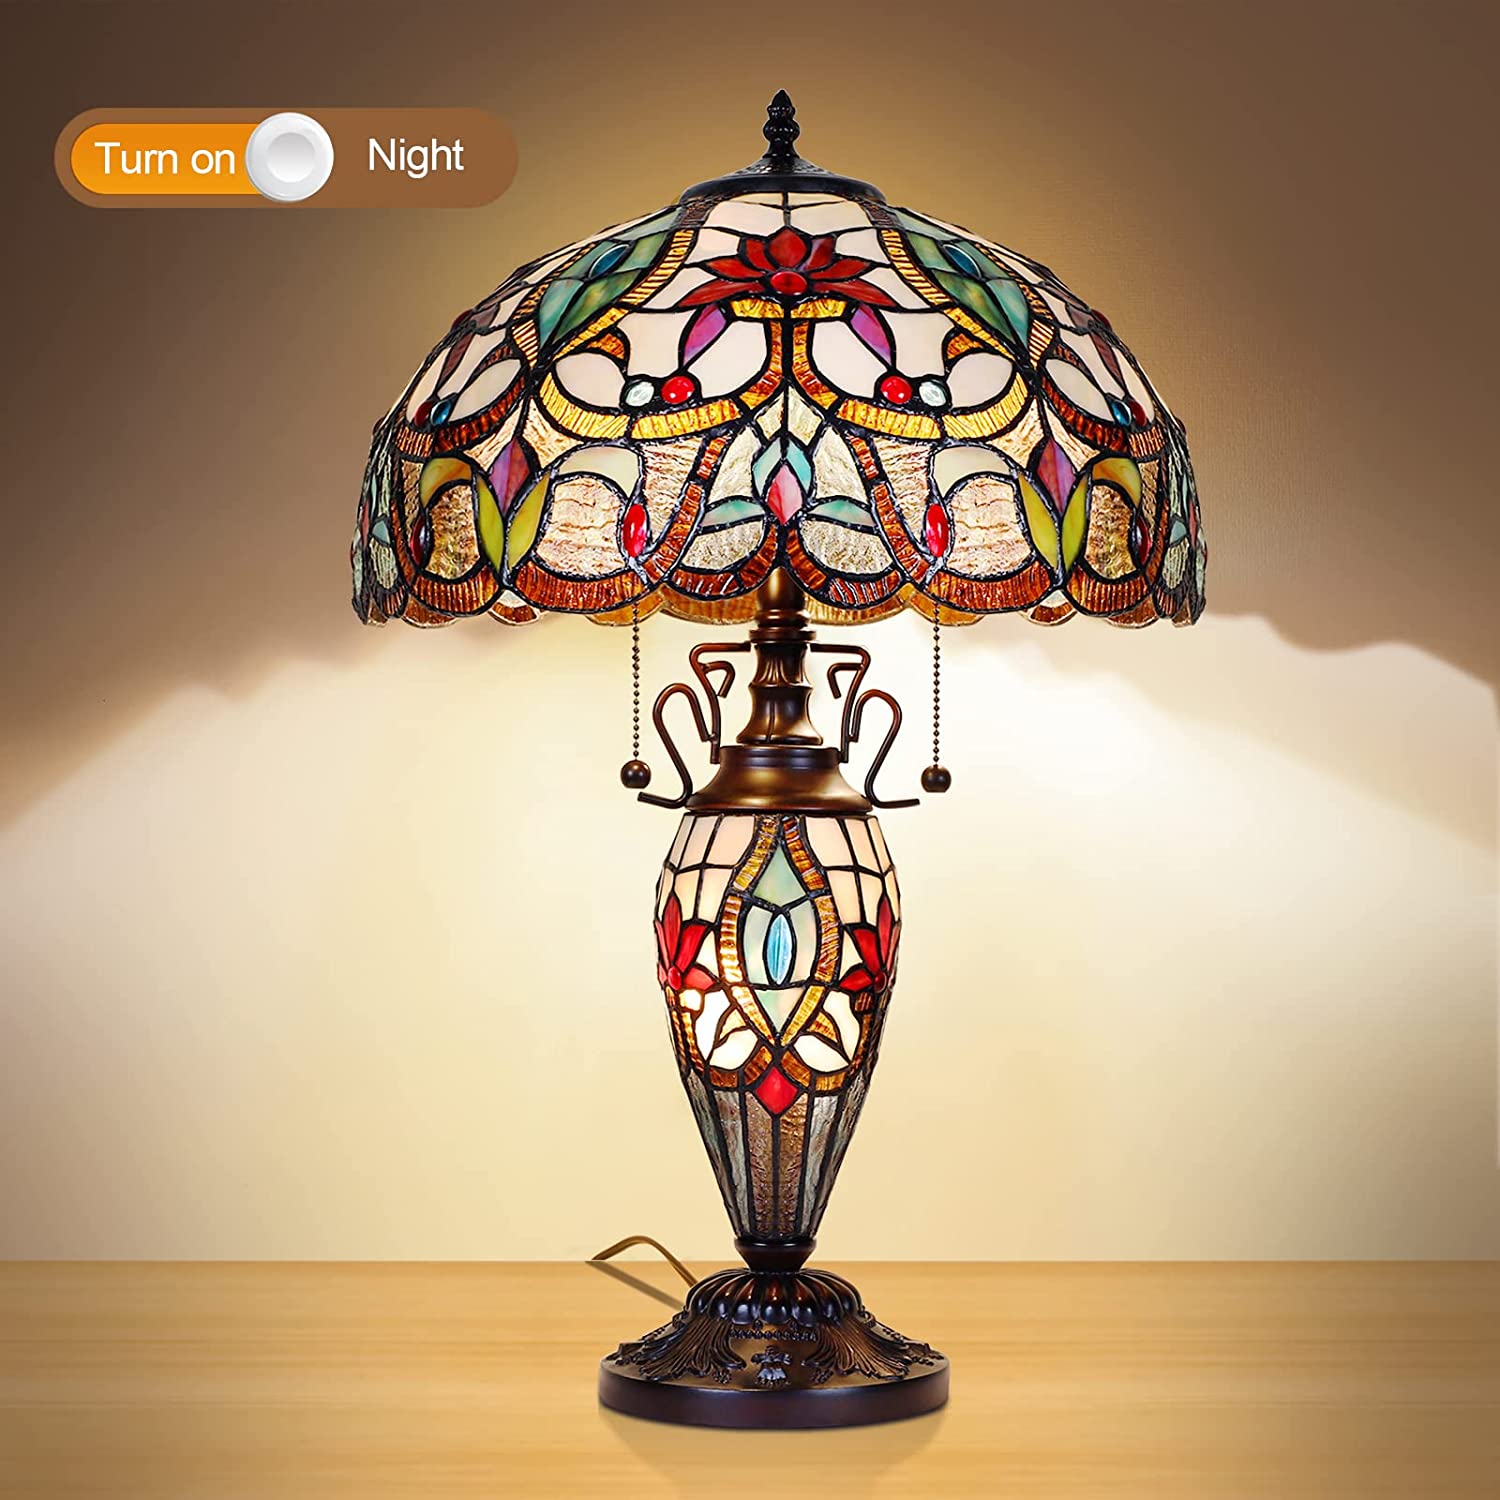 MOOVIEW  Lamp Night Light Stained Glass  Table Lamp 24\u2019\u2019 Tall Vintage Living Room Bedroom  Office Bedside Reading Lamp 3 LED Bulb Included  Orange Christmas Gift